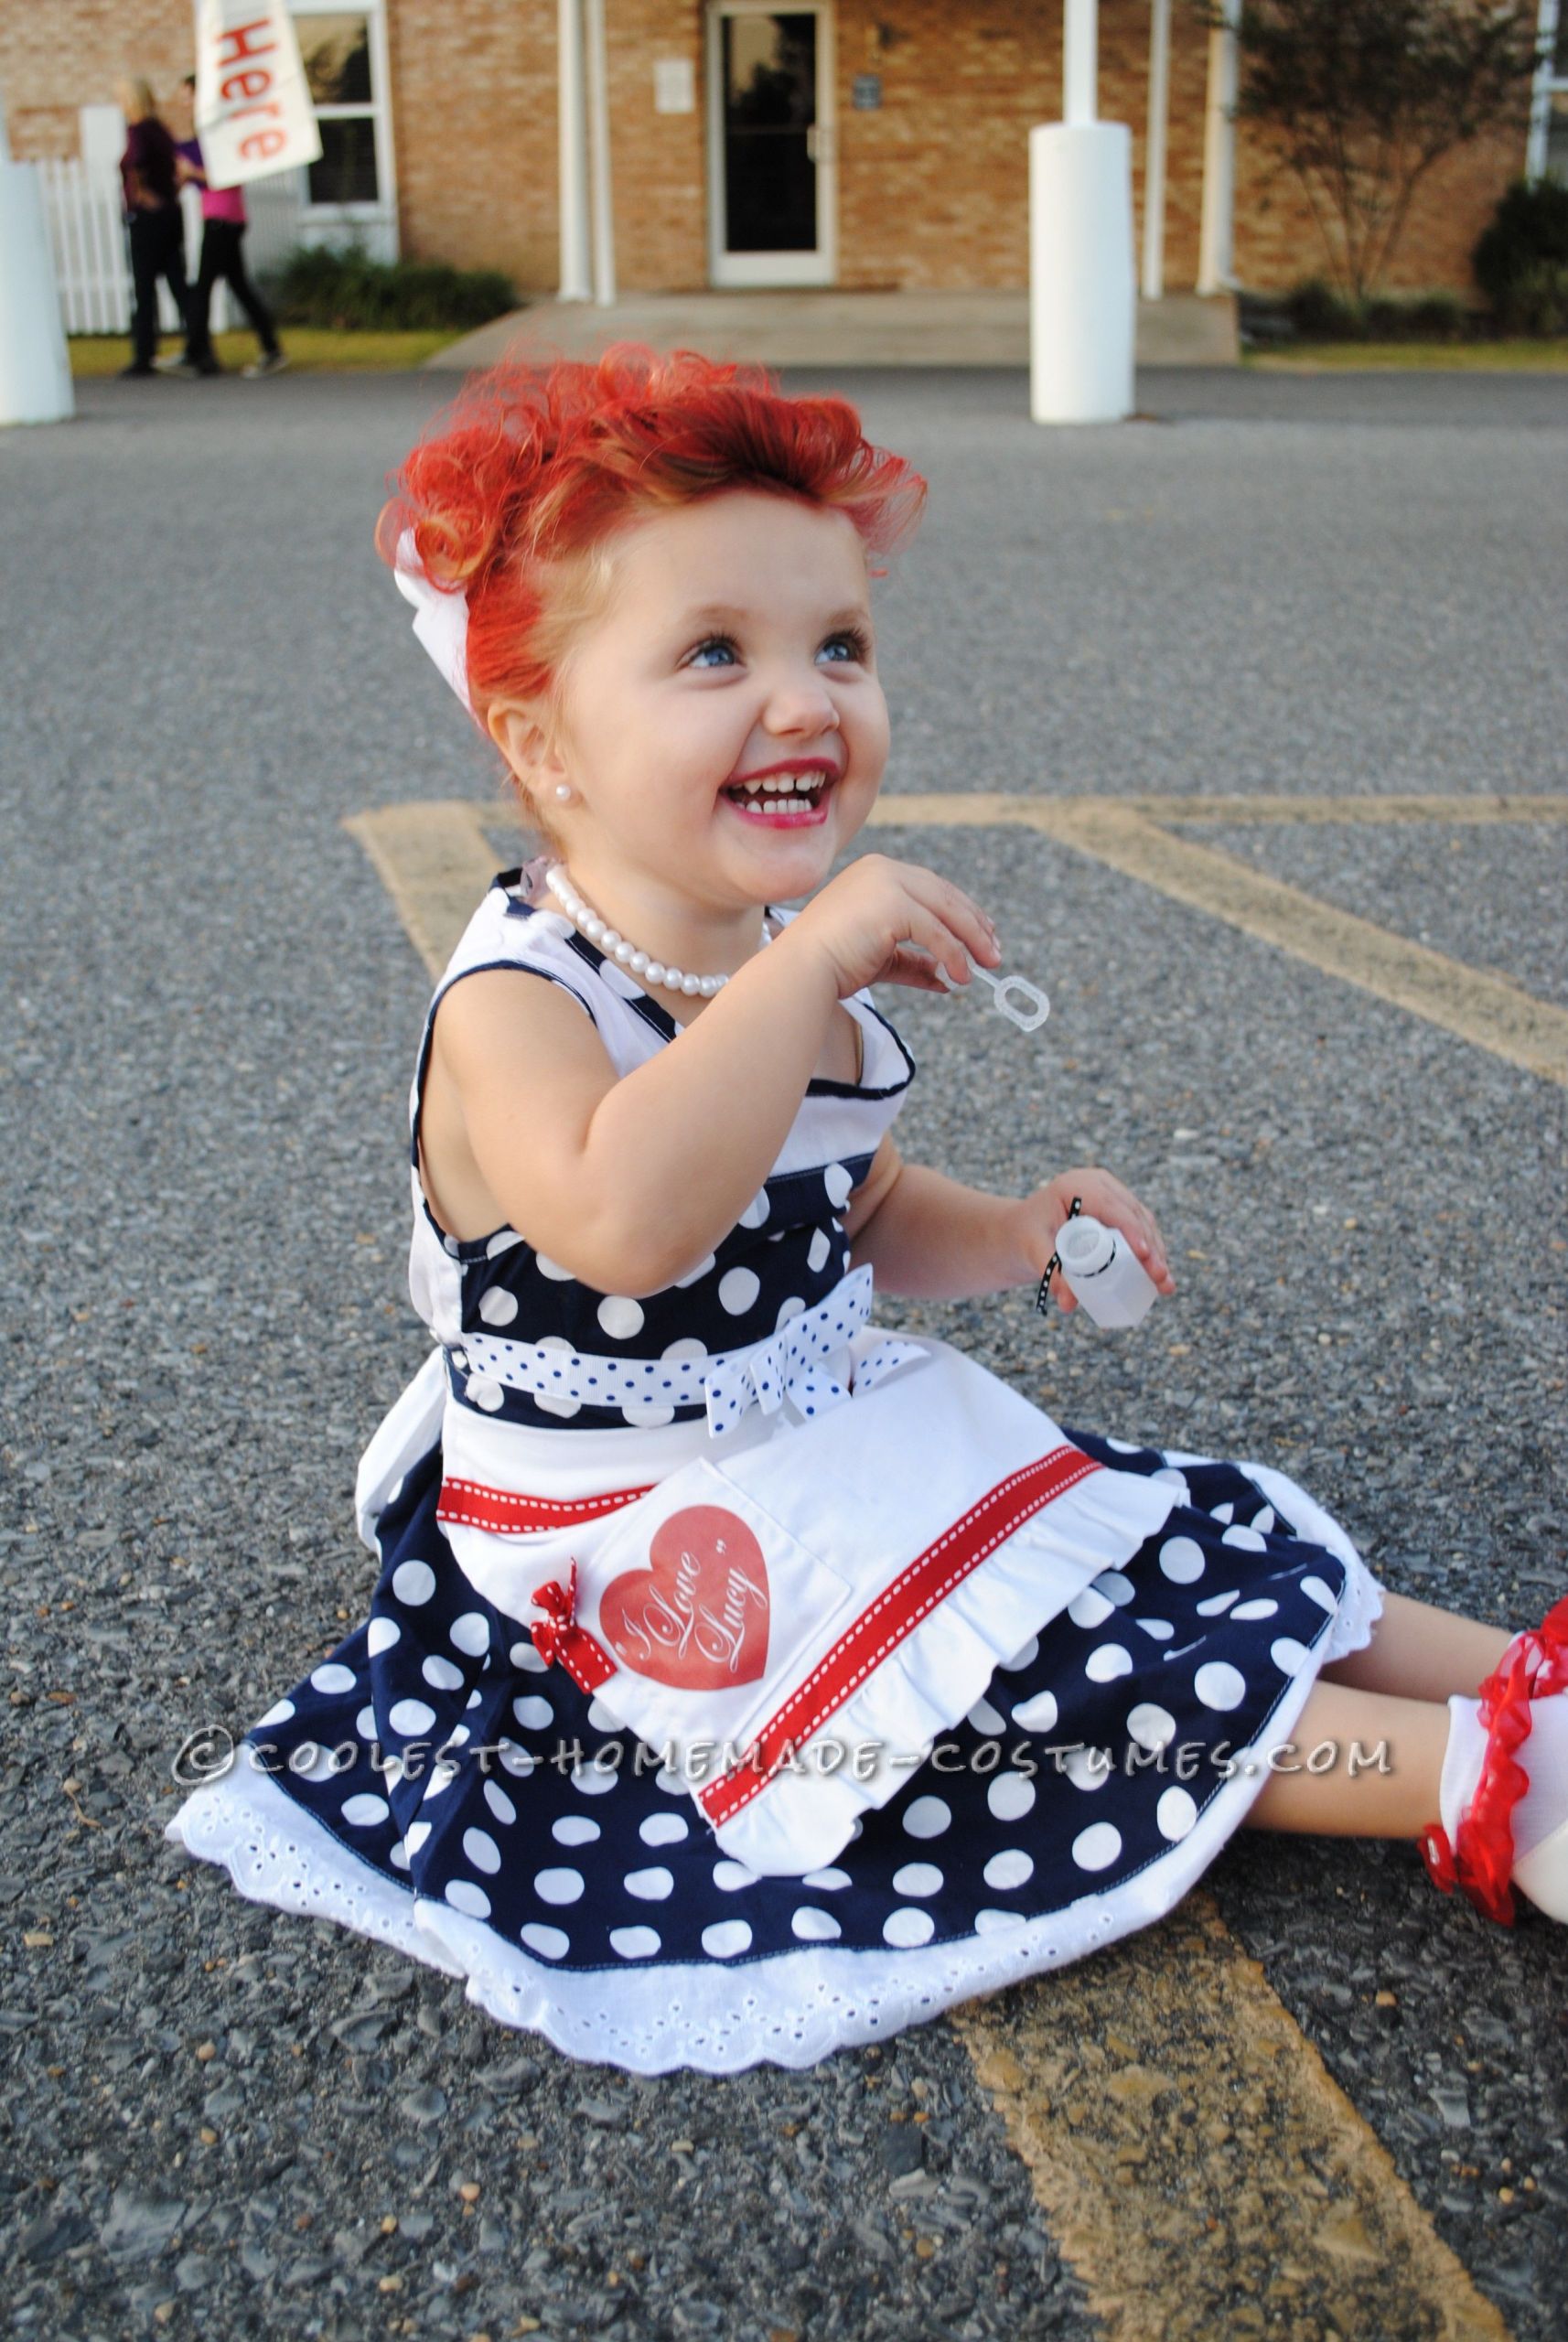 Kids Costumes DIY
 Adorable “I Love Lucy” Homemade Costume for a Toddler